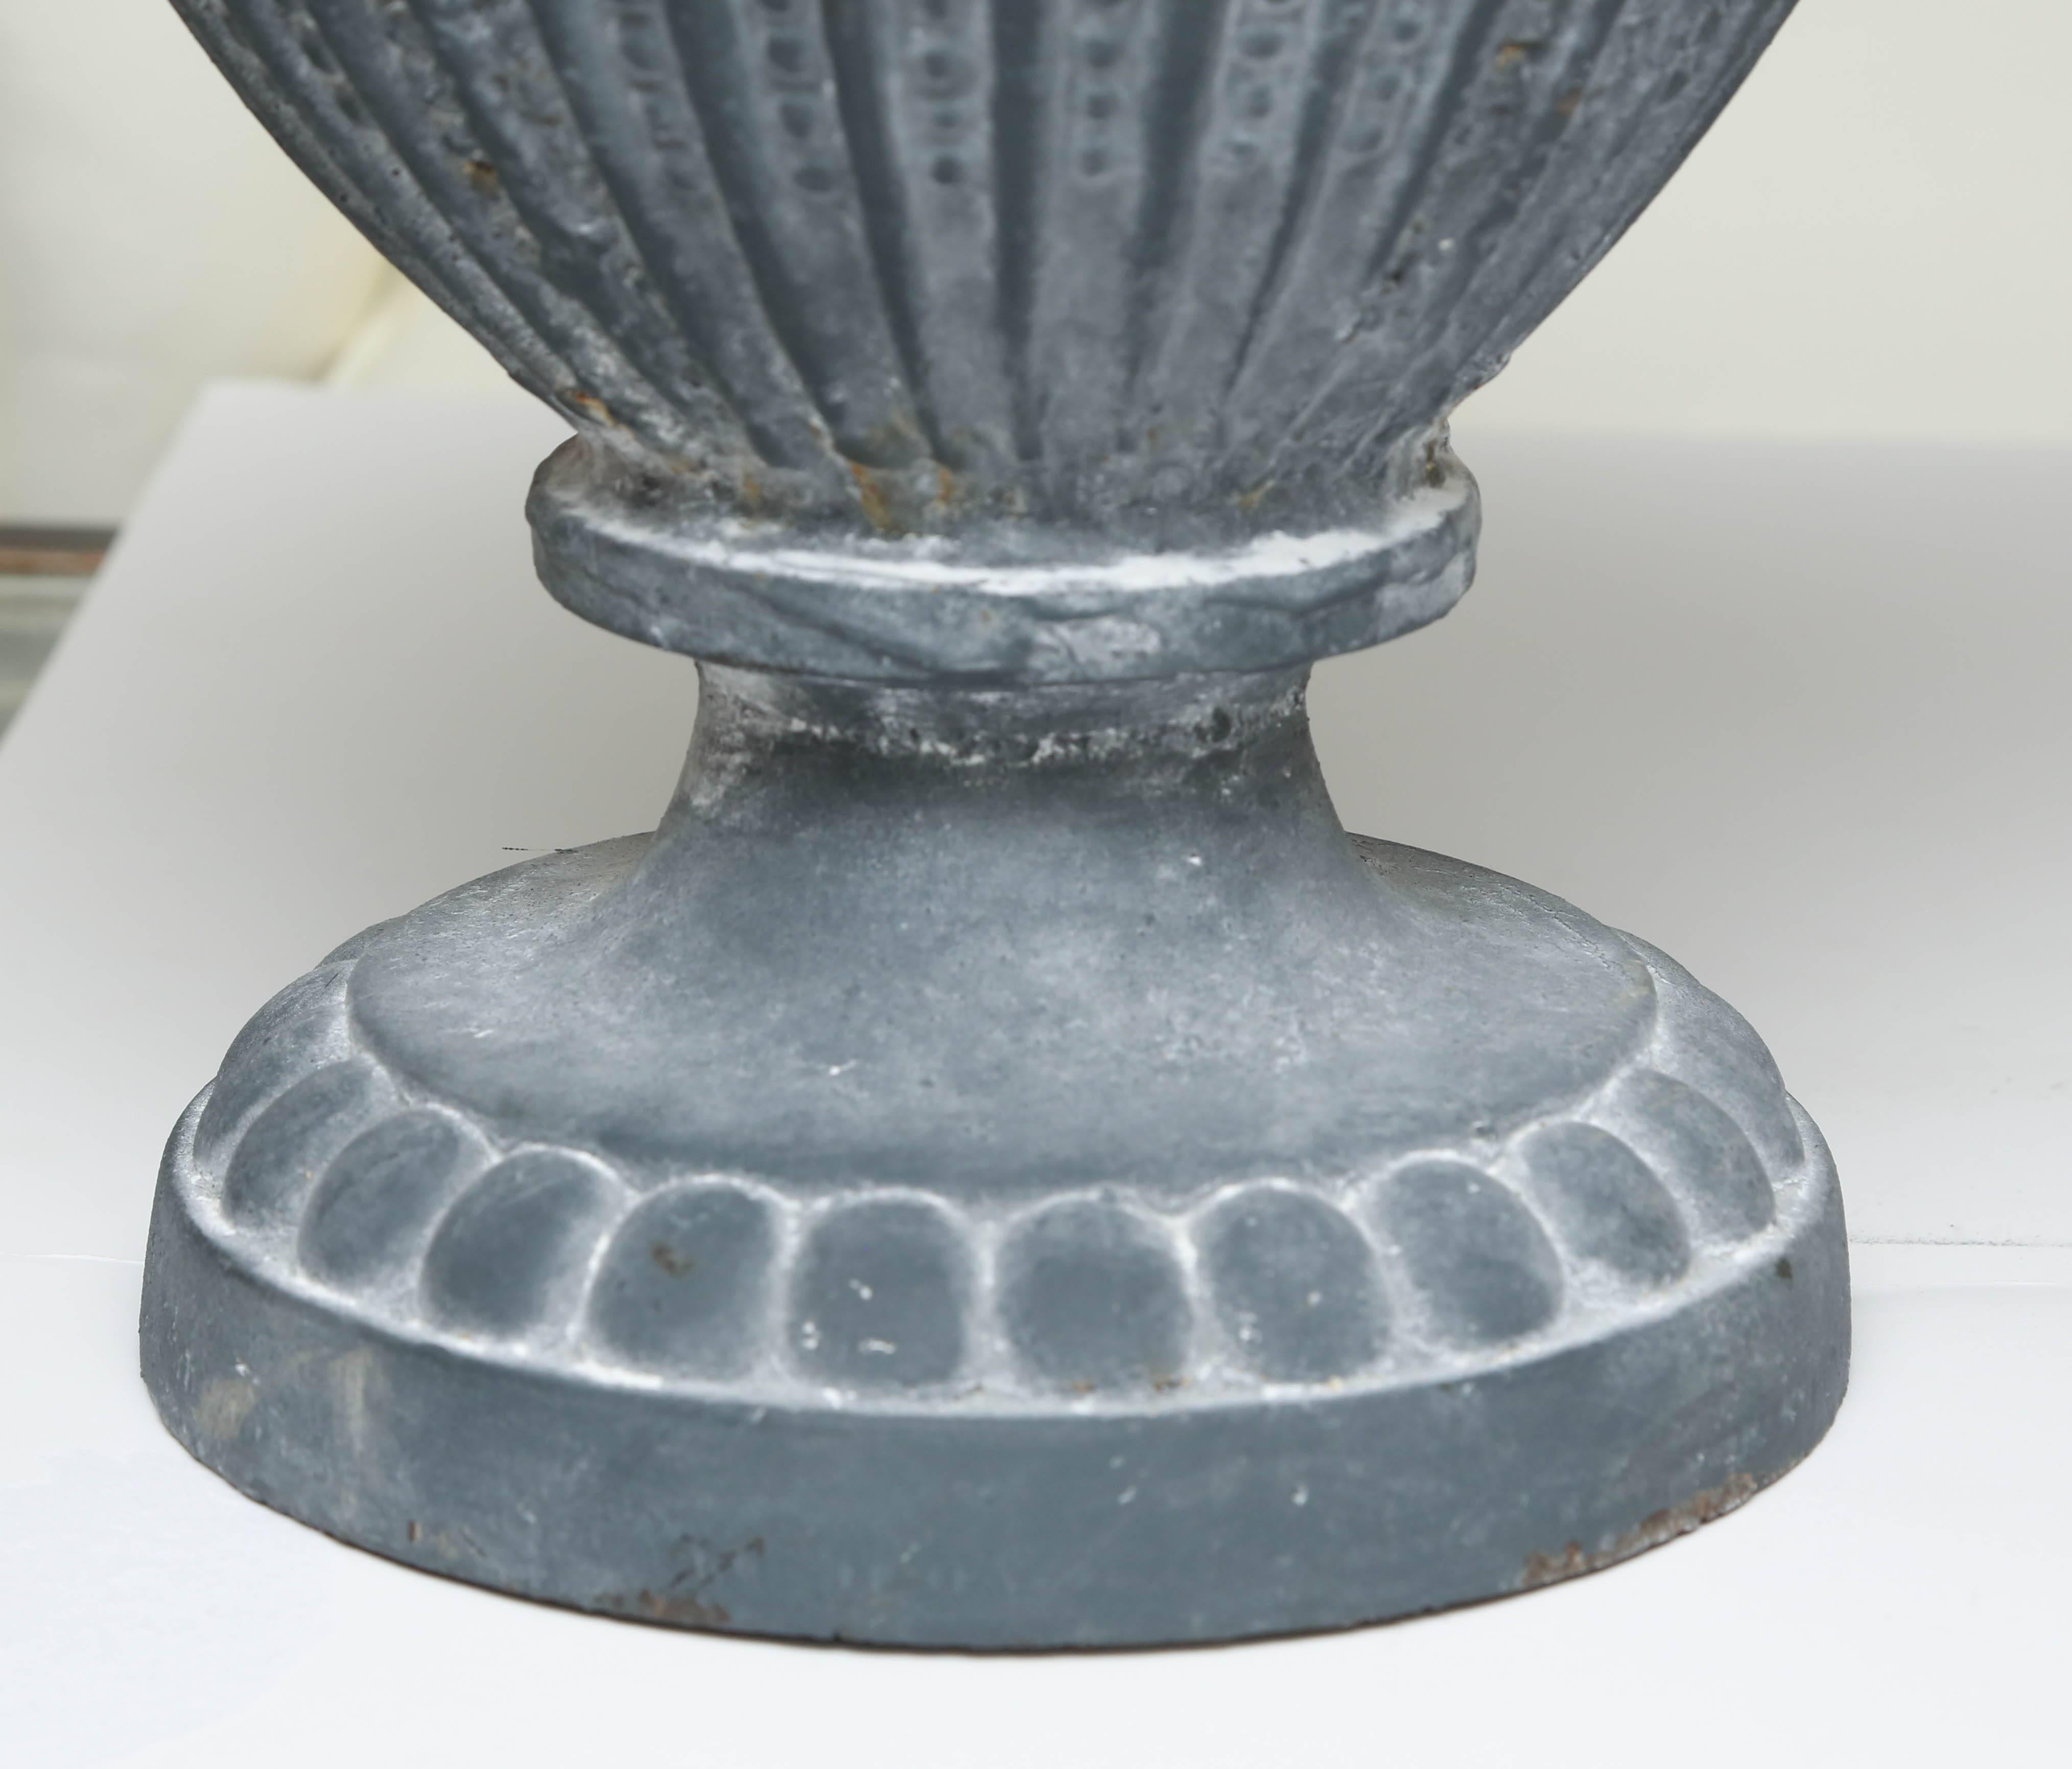 Great Greco-Roman form, excellent size.
Lids are removable.